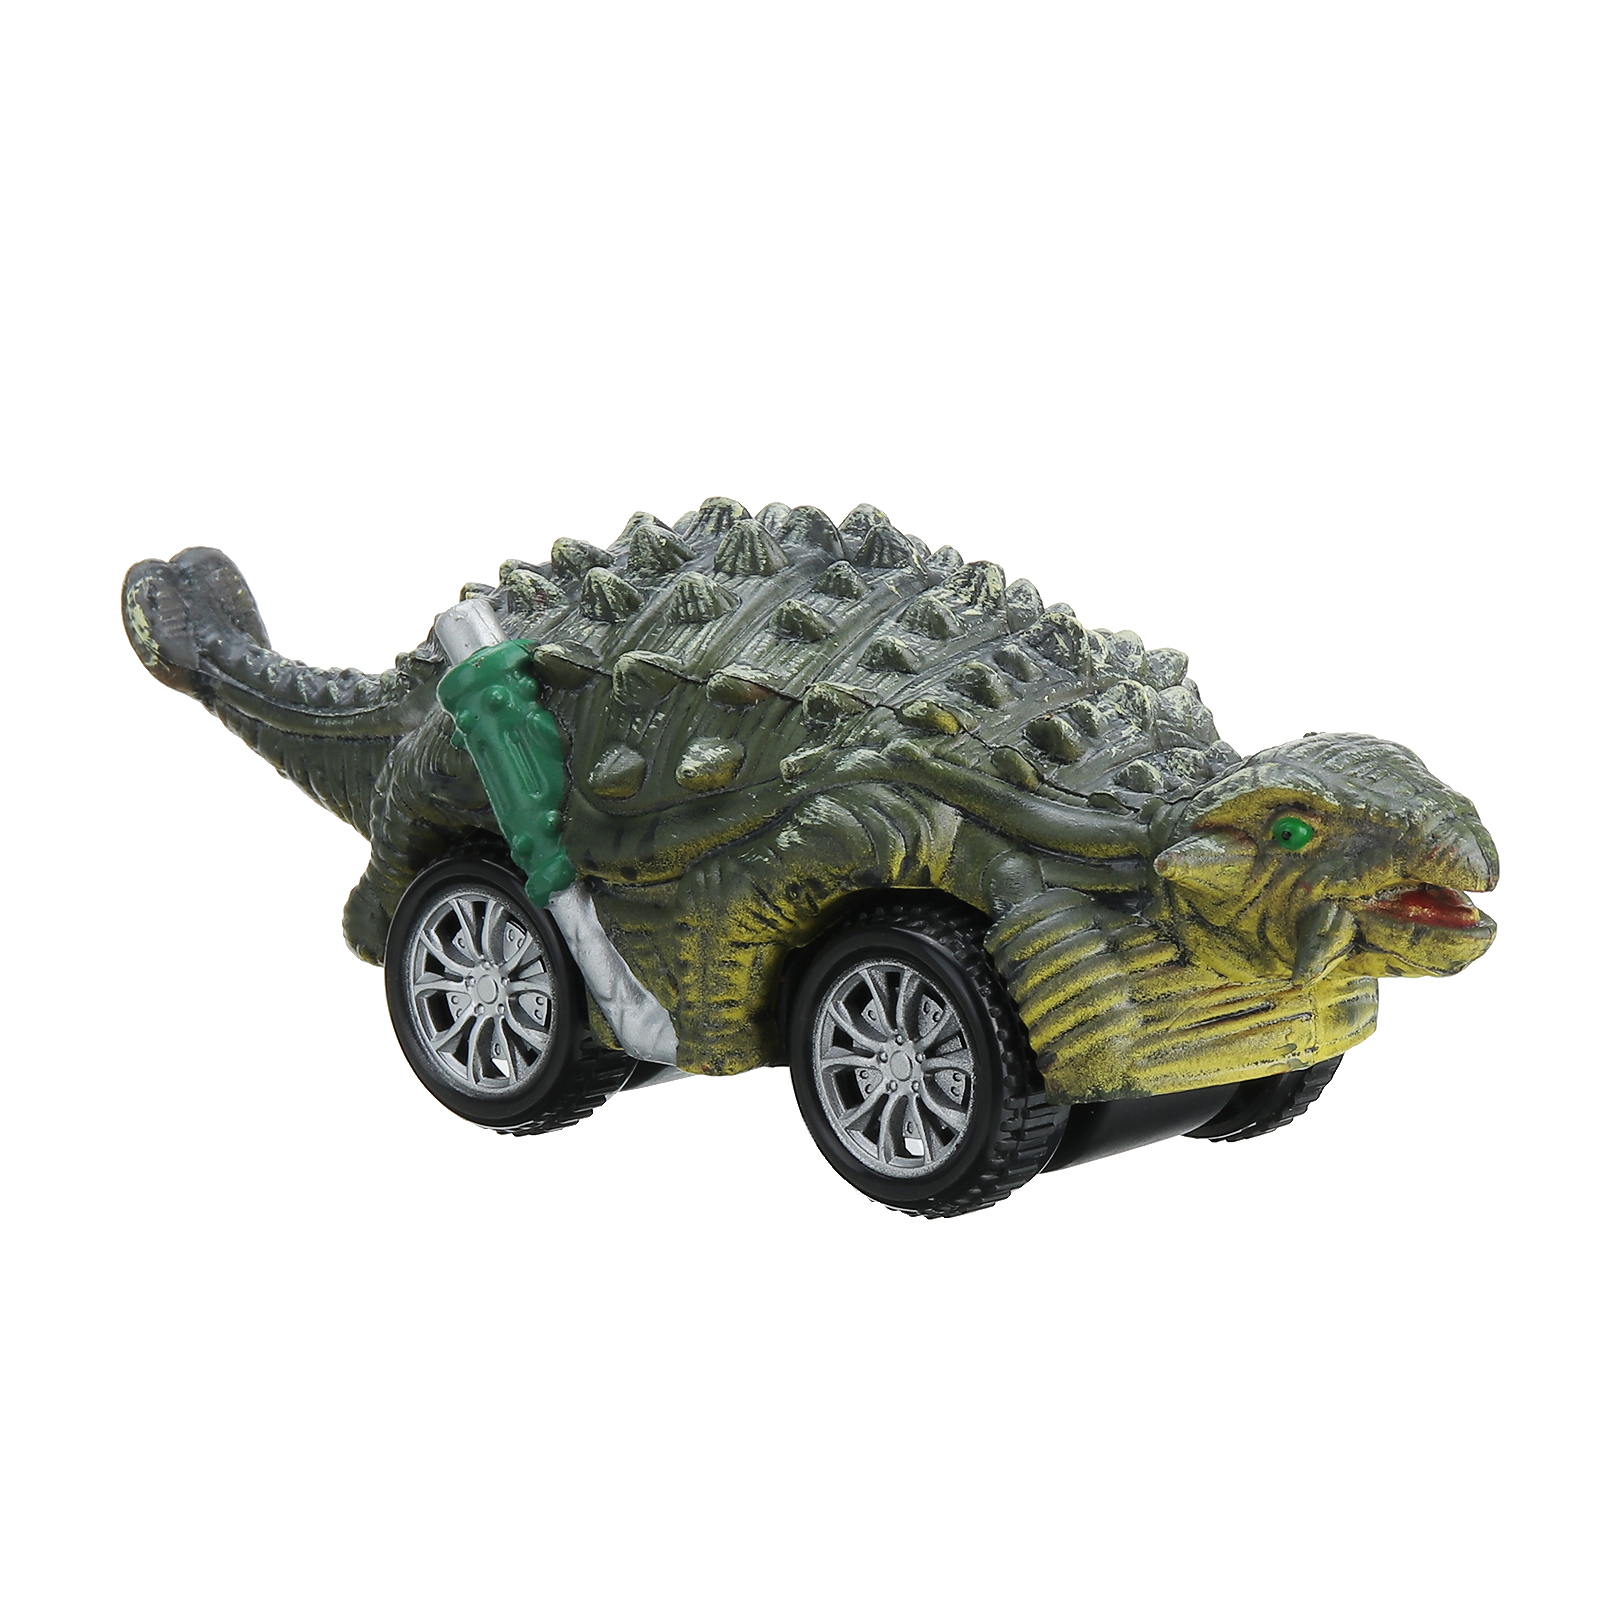 Pickwoo-Dinosaur-Toys-Cars-Inertia-Vehicles-Toddlers-Kids-Dinosaur-Party-Games-with-T-Rex-Dino-Toys--1895631-14